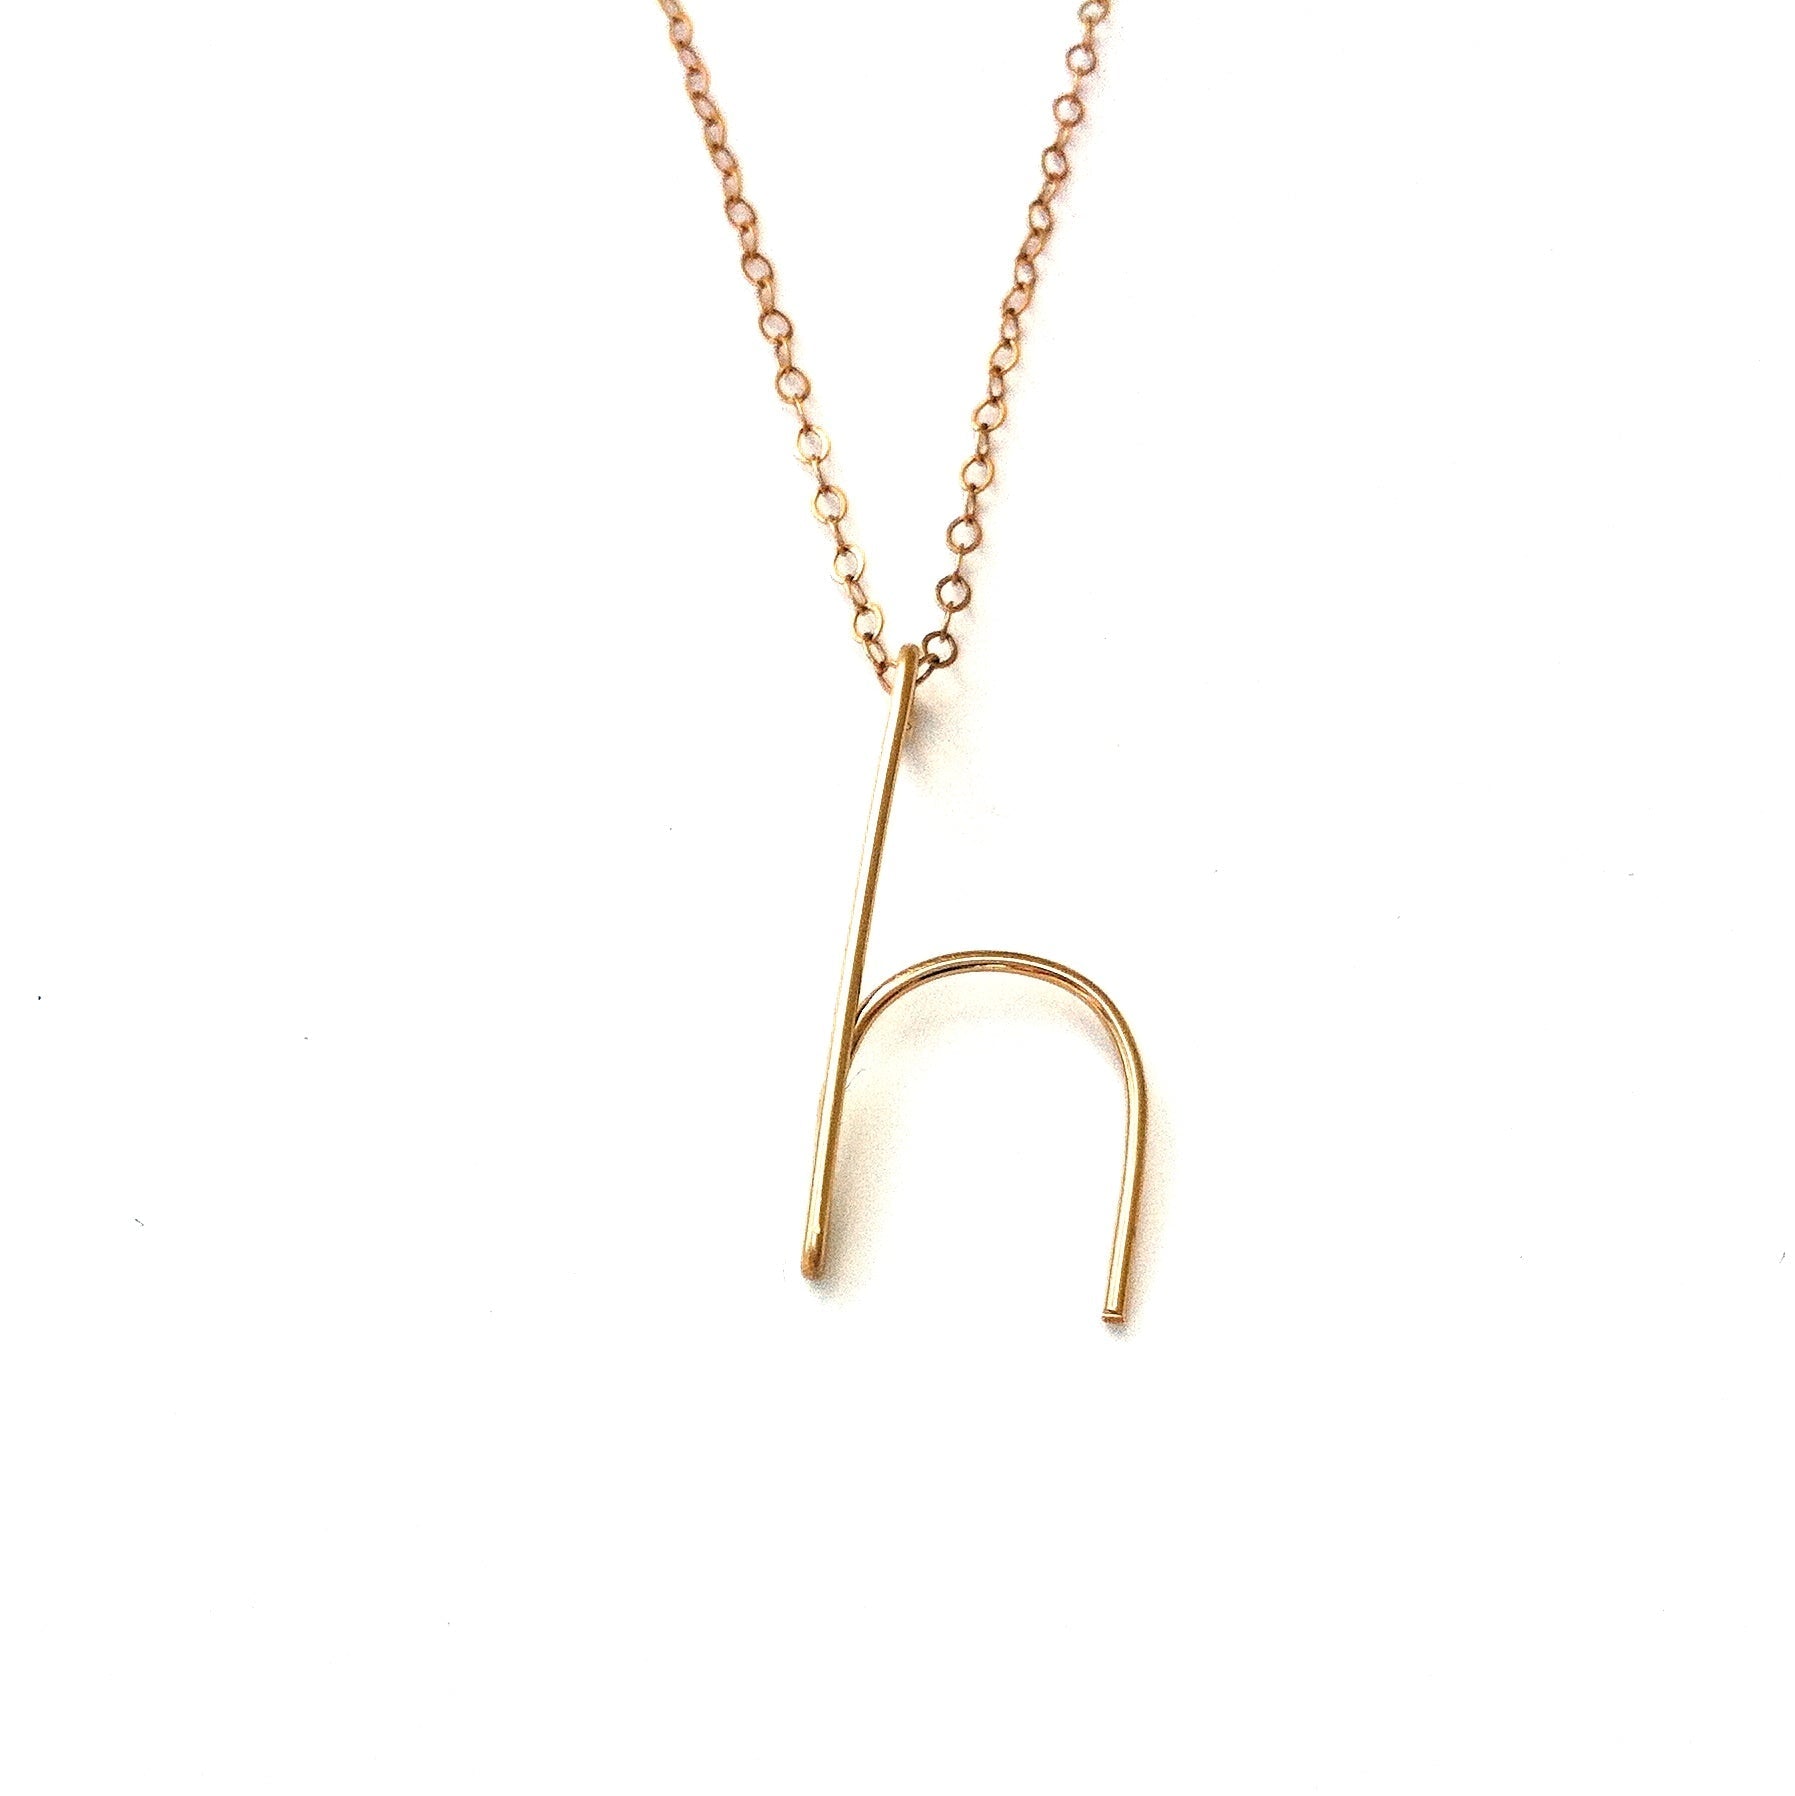 Handmade Initial Necklace Robyn Canady h 14K Gold Filled 